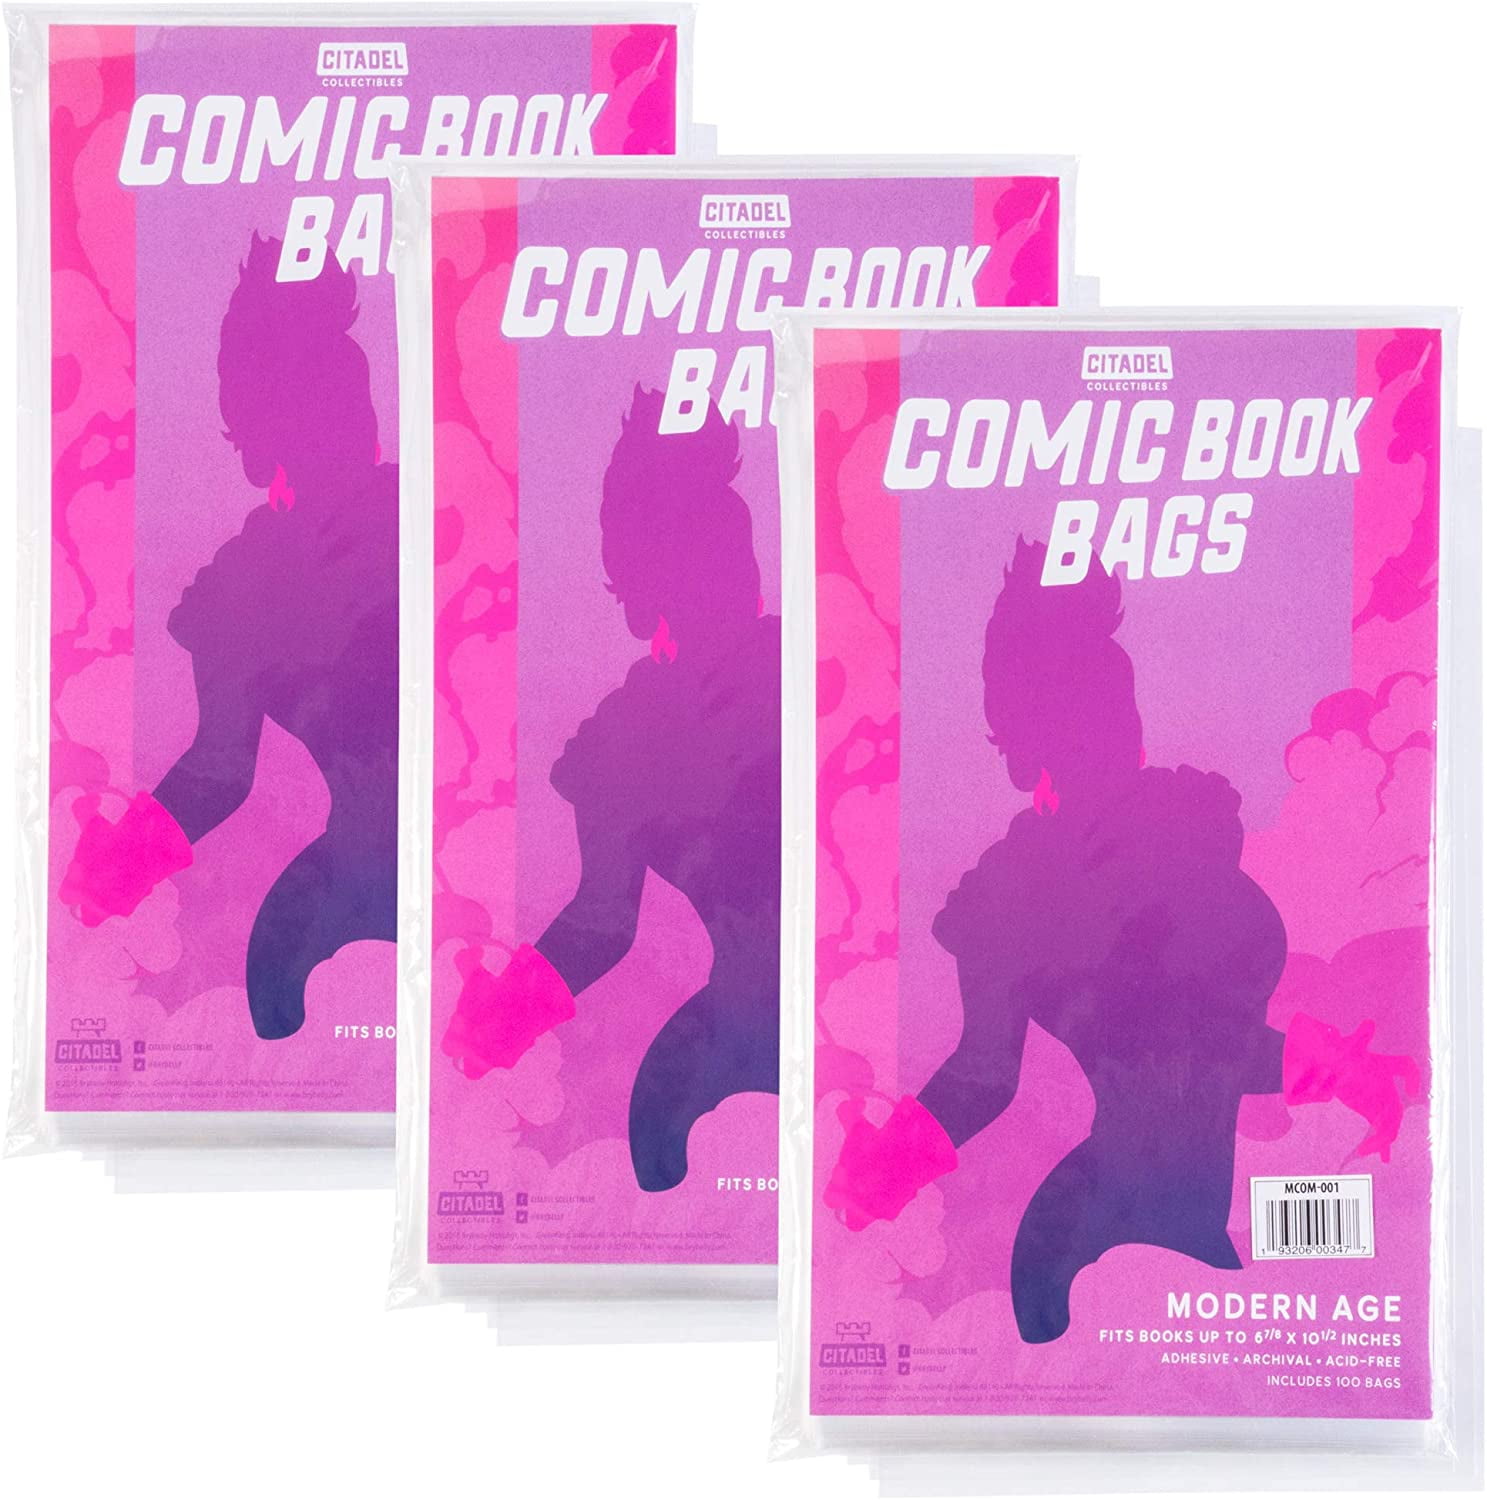 modern-age-comic-book-bags-collector-bundle-300-pack-of-acid-free